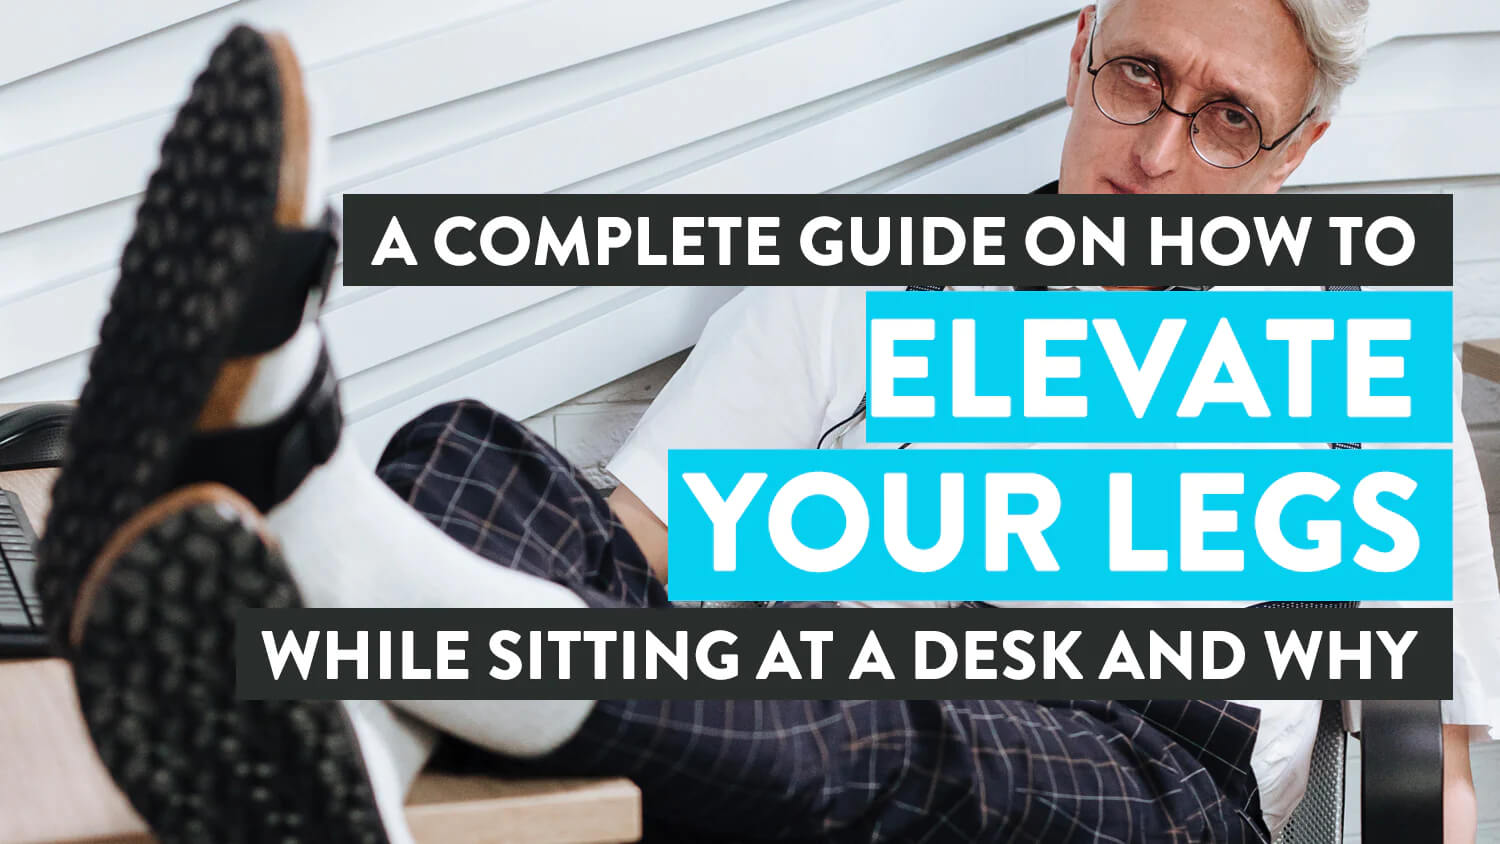 Elevating Your Legs Has More Benefits Than You Think